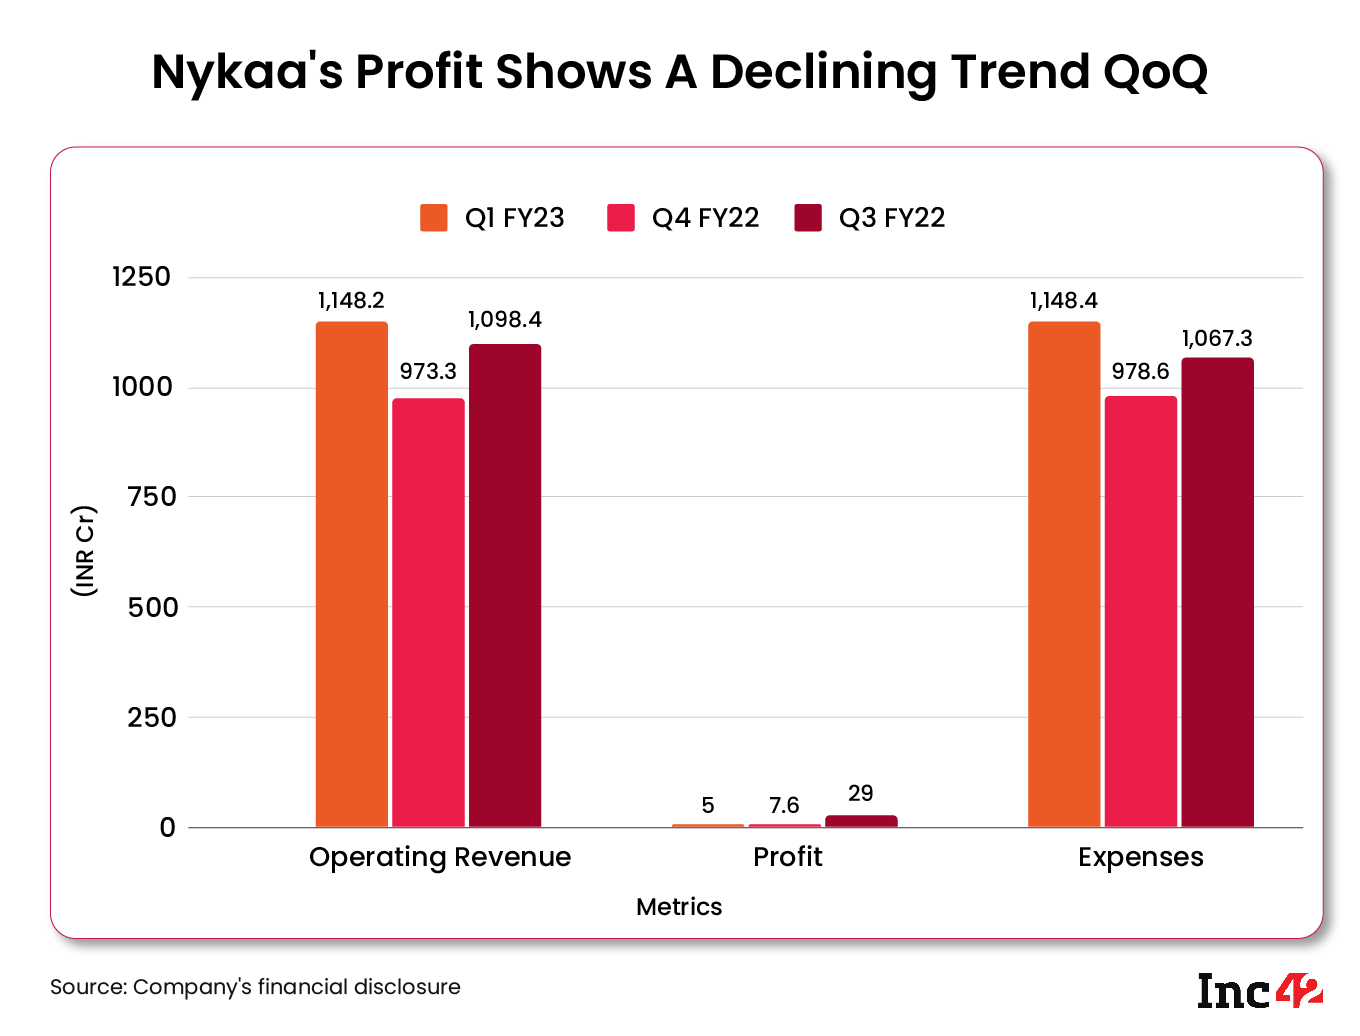 Nykaa Revenues: Rising D2C Ecommerce Brands Increasing Competition